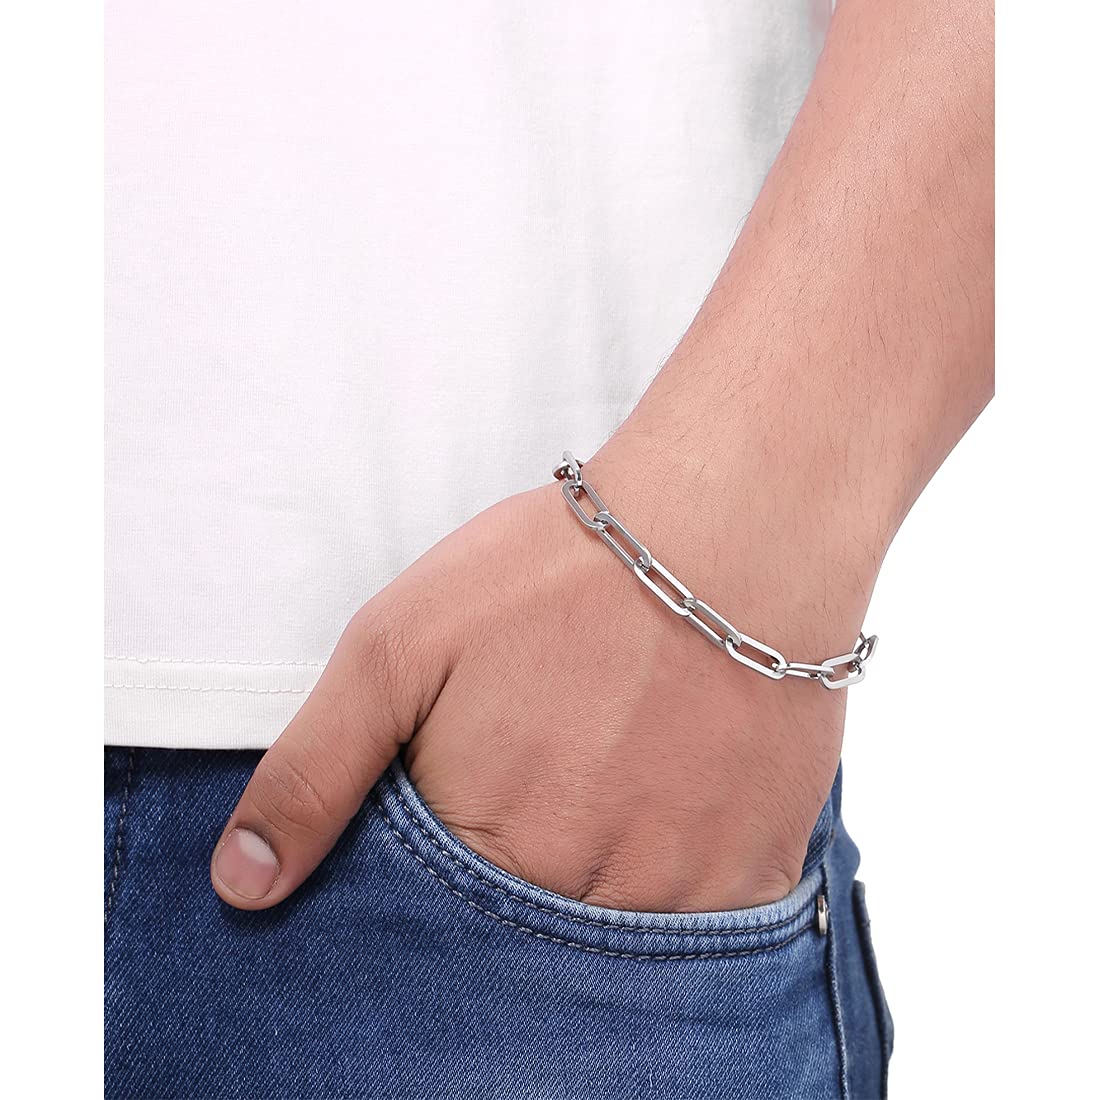 Yellow Chimes Chain Bracelet for Men Stainless Steel Link Chain Design